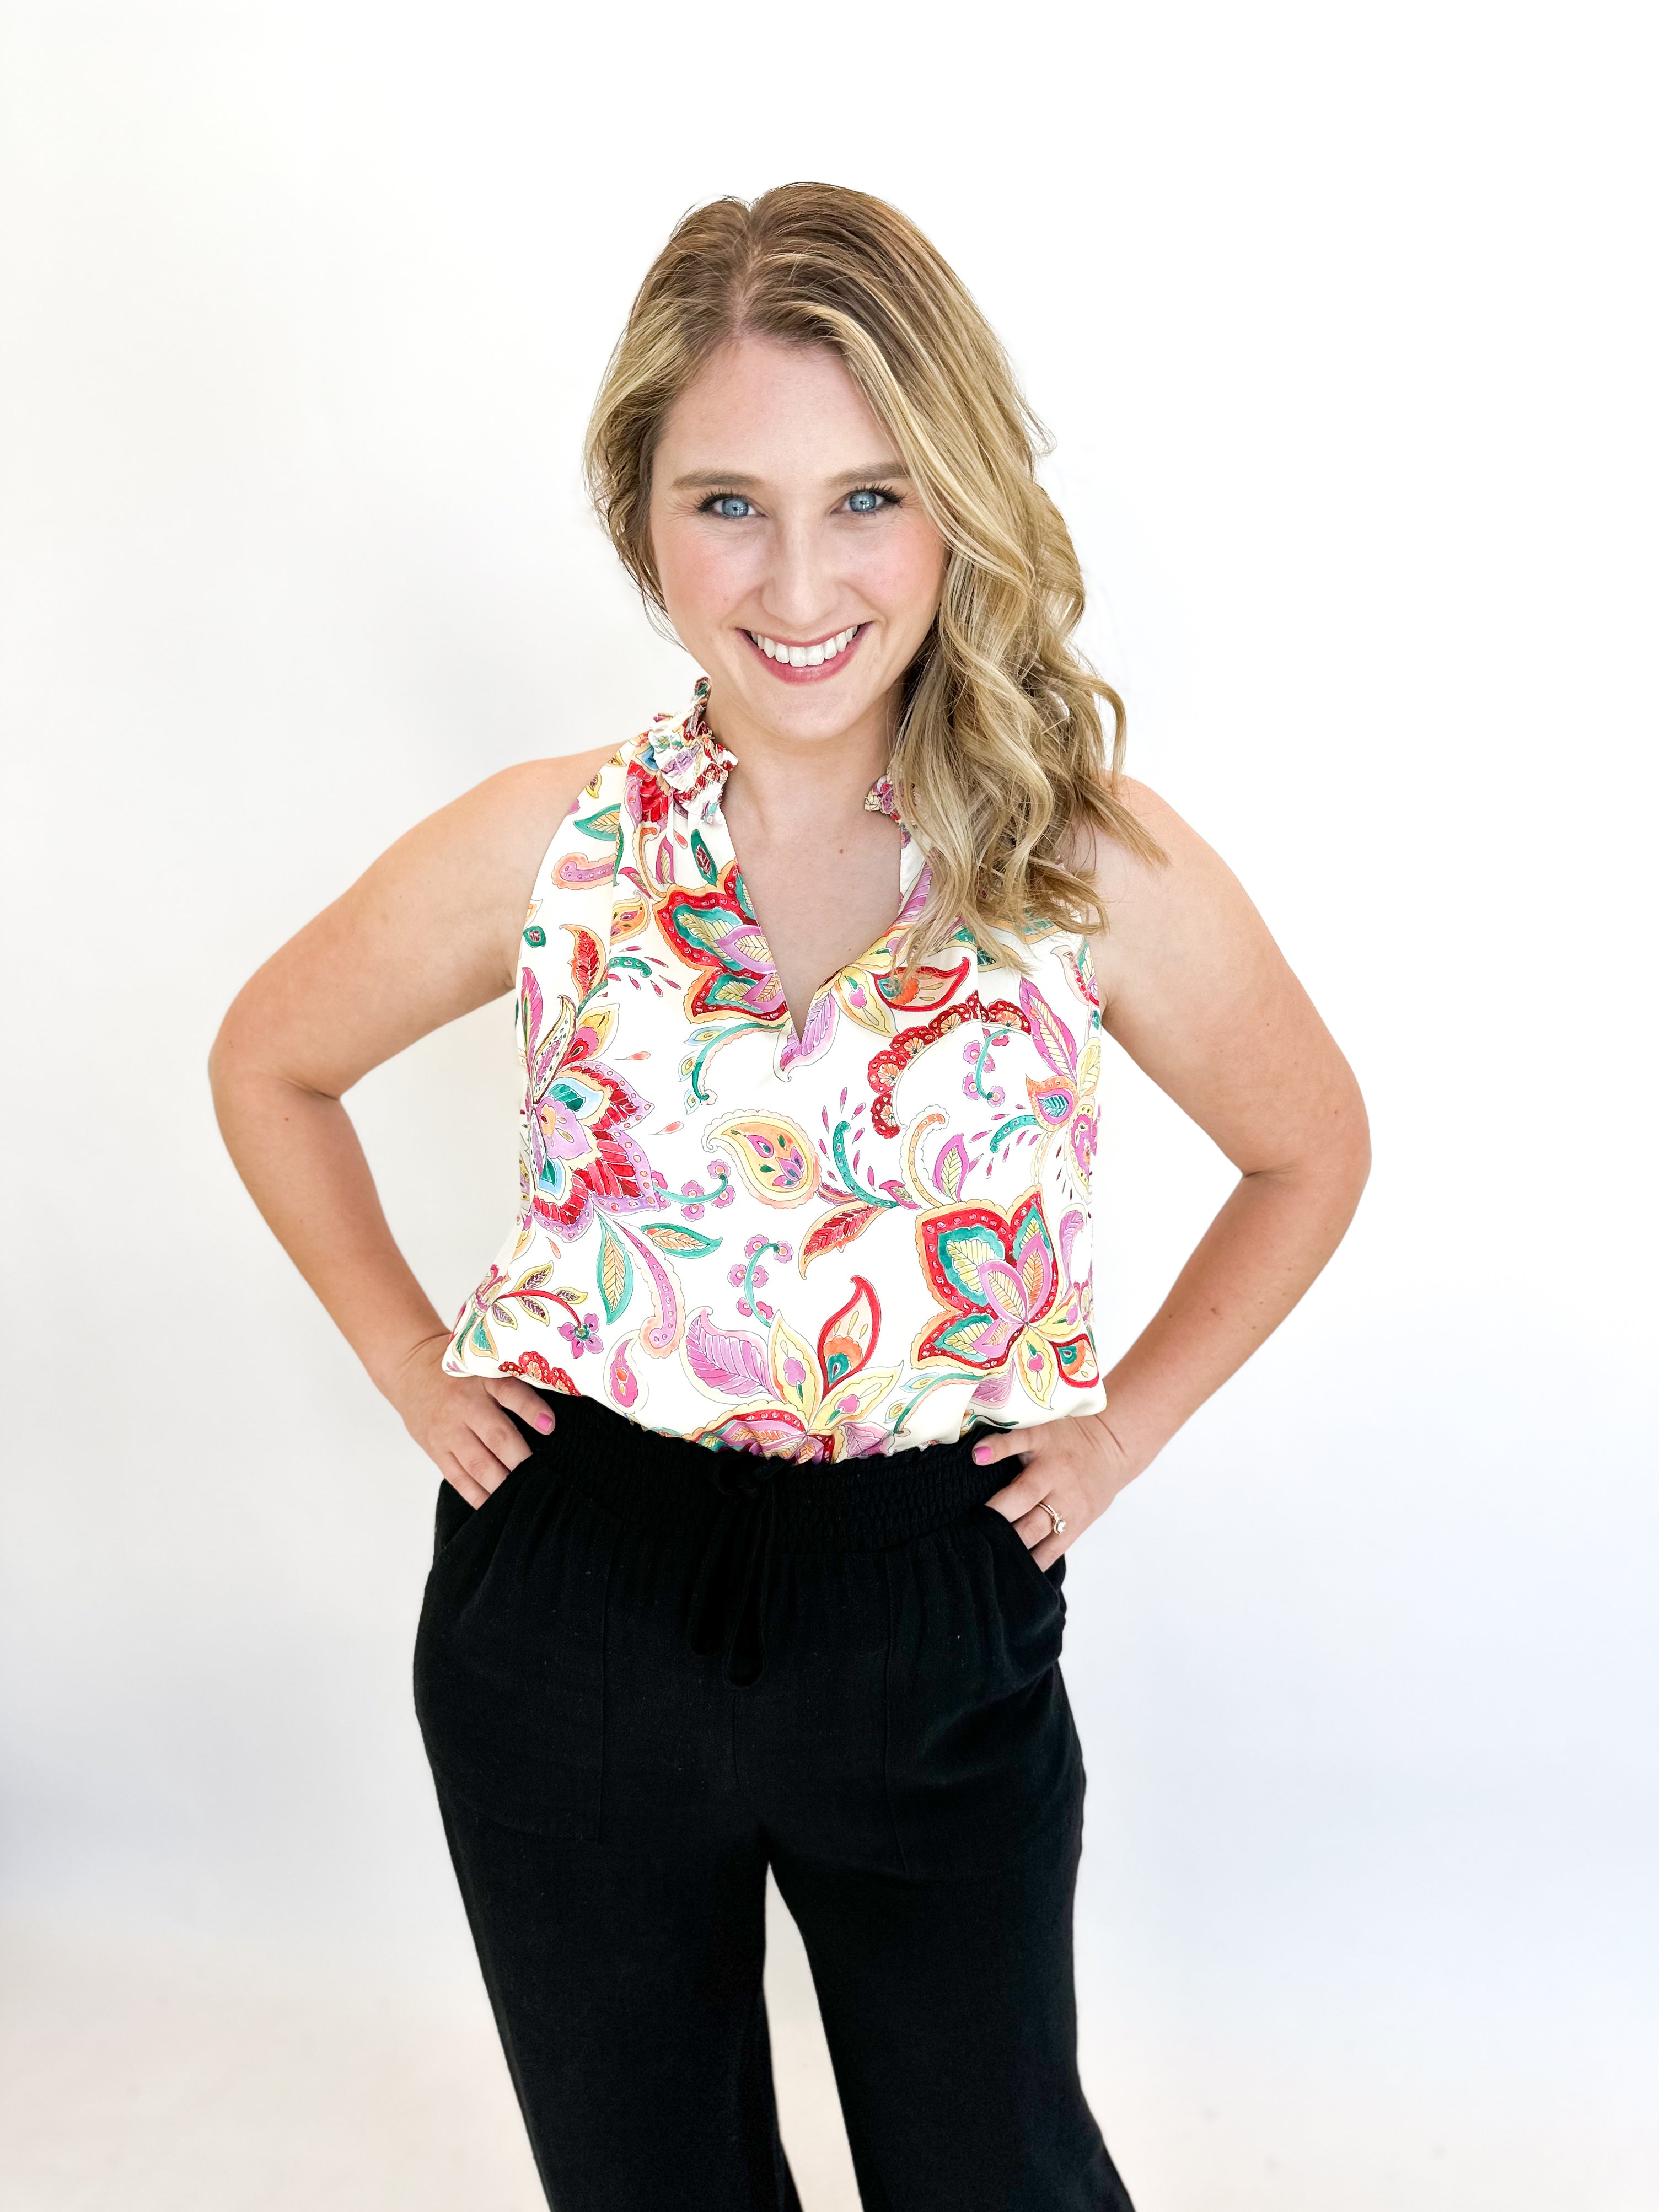 Paisley & Floral Cami - THML-200 Fashion Blouses-THML-July & June Women's Fashion Boutique Located in San Antonio, Texas